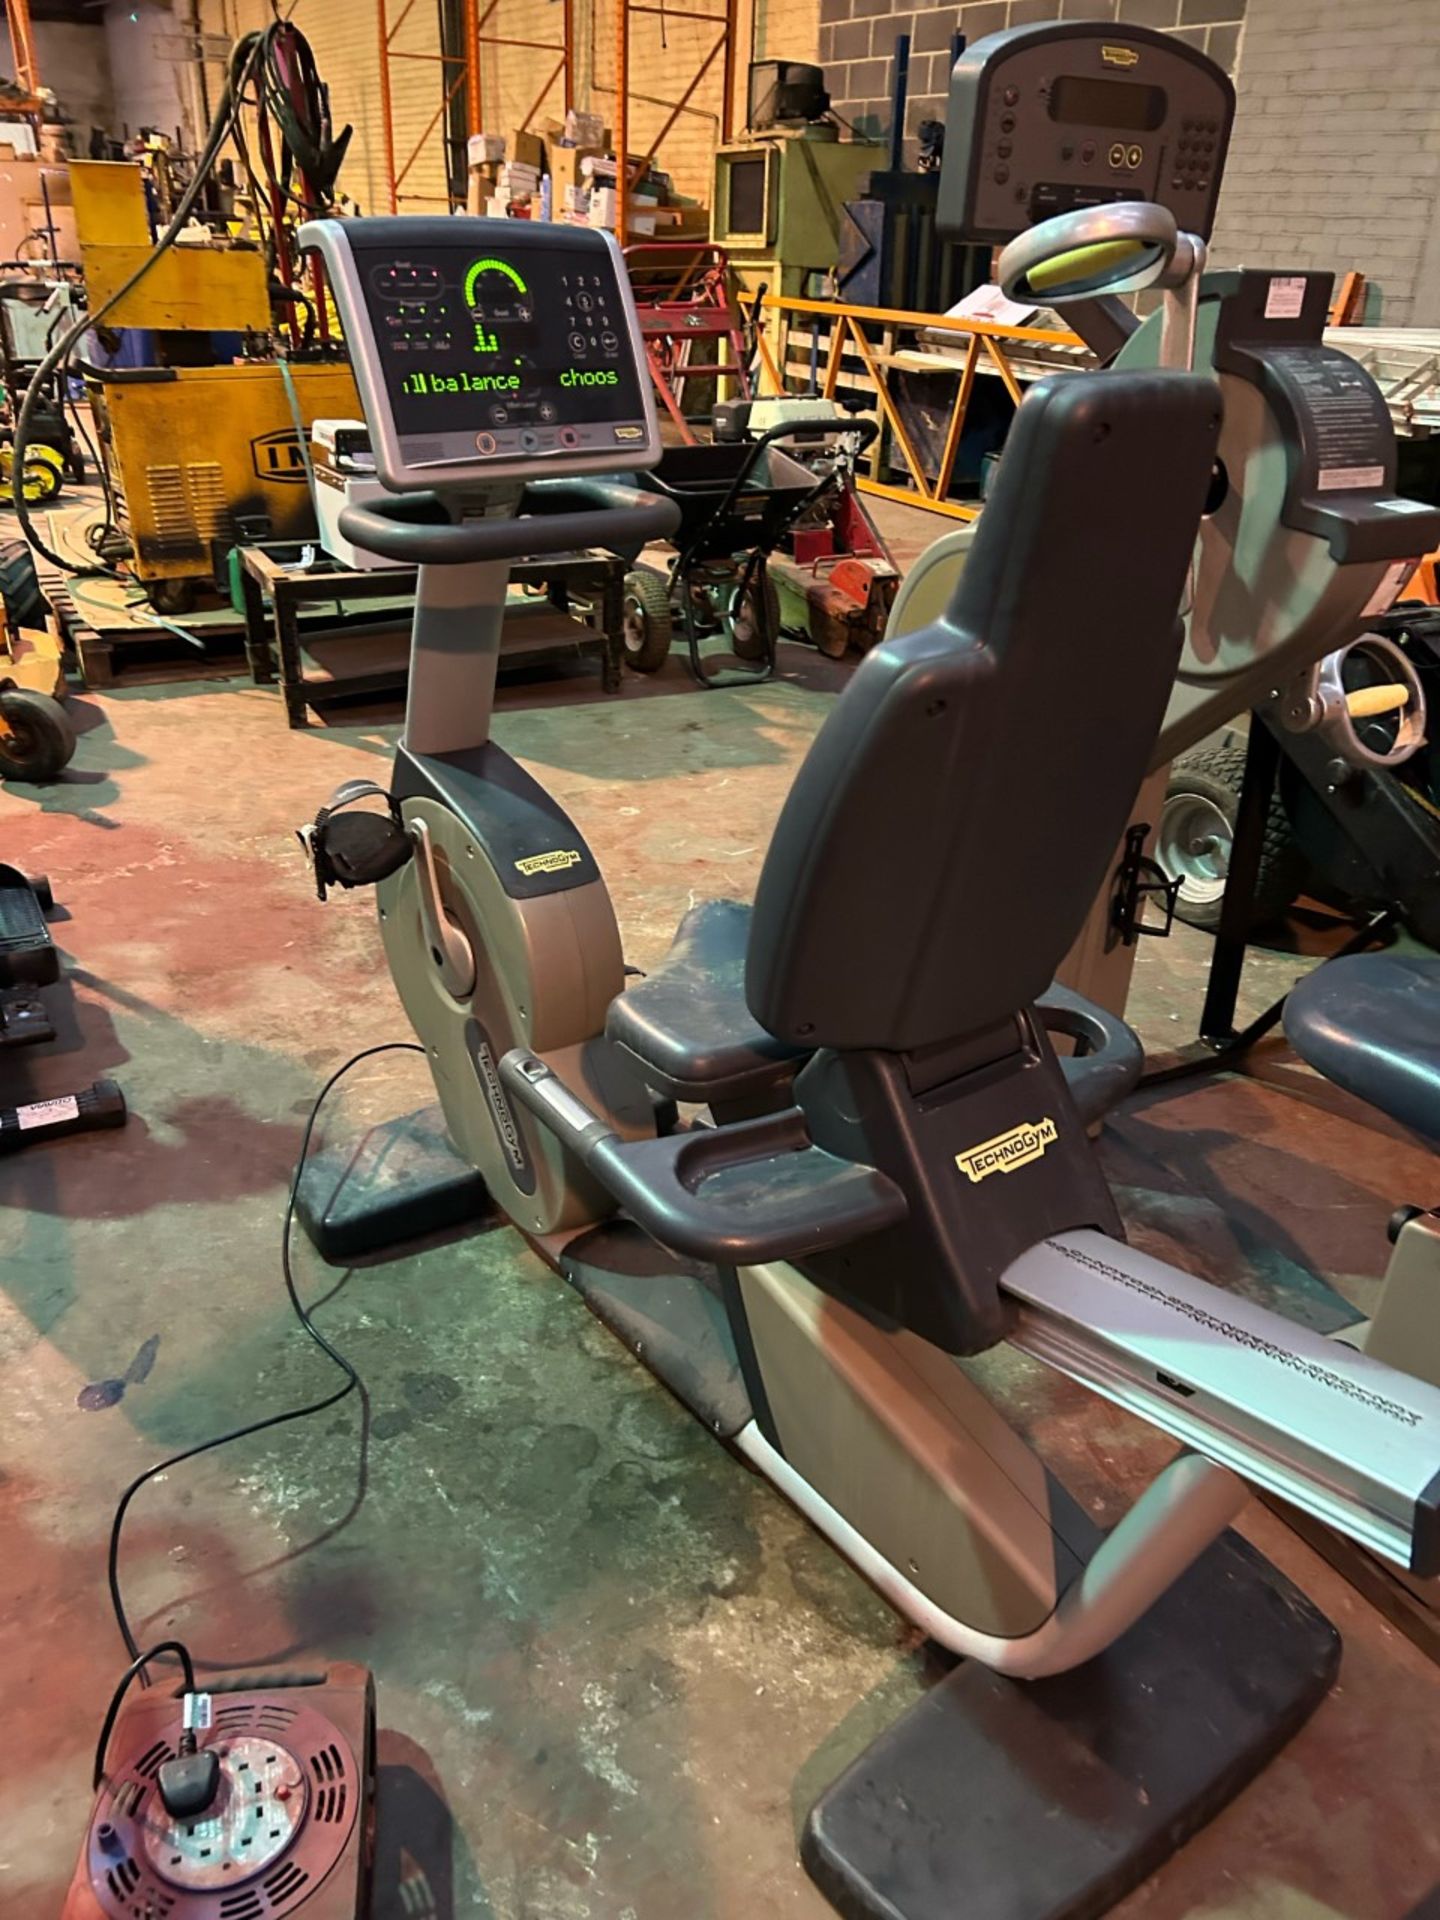 Technogym excite 700i recline recumbent exercise bike. Excellent condition, full working order - Image 2 of 2